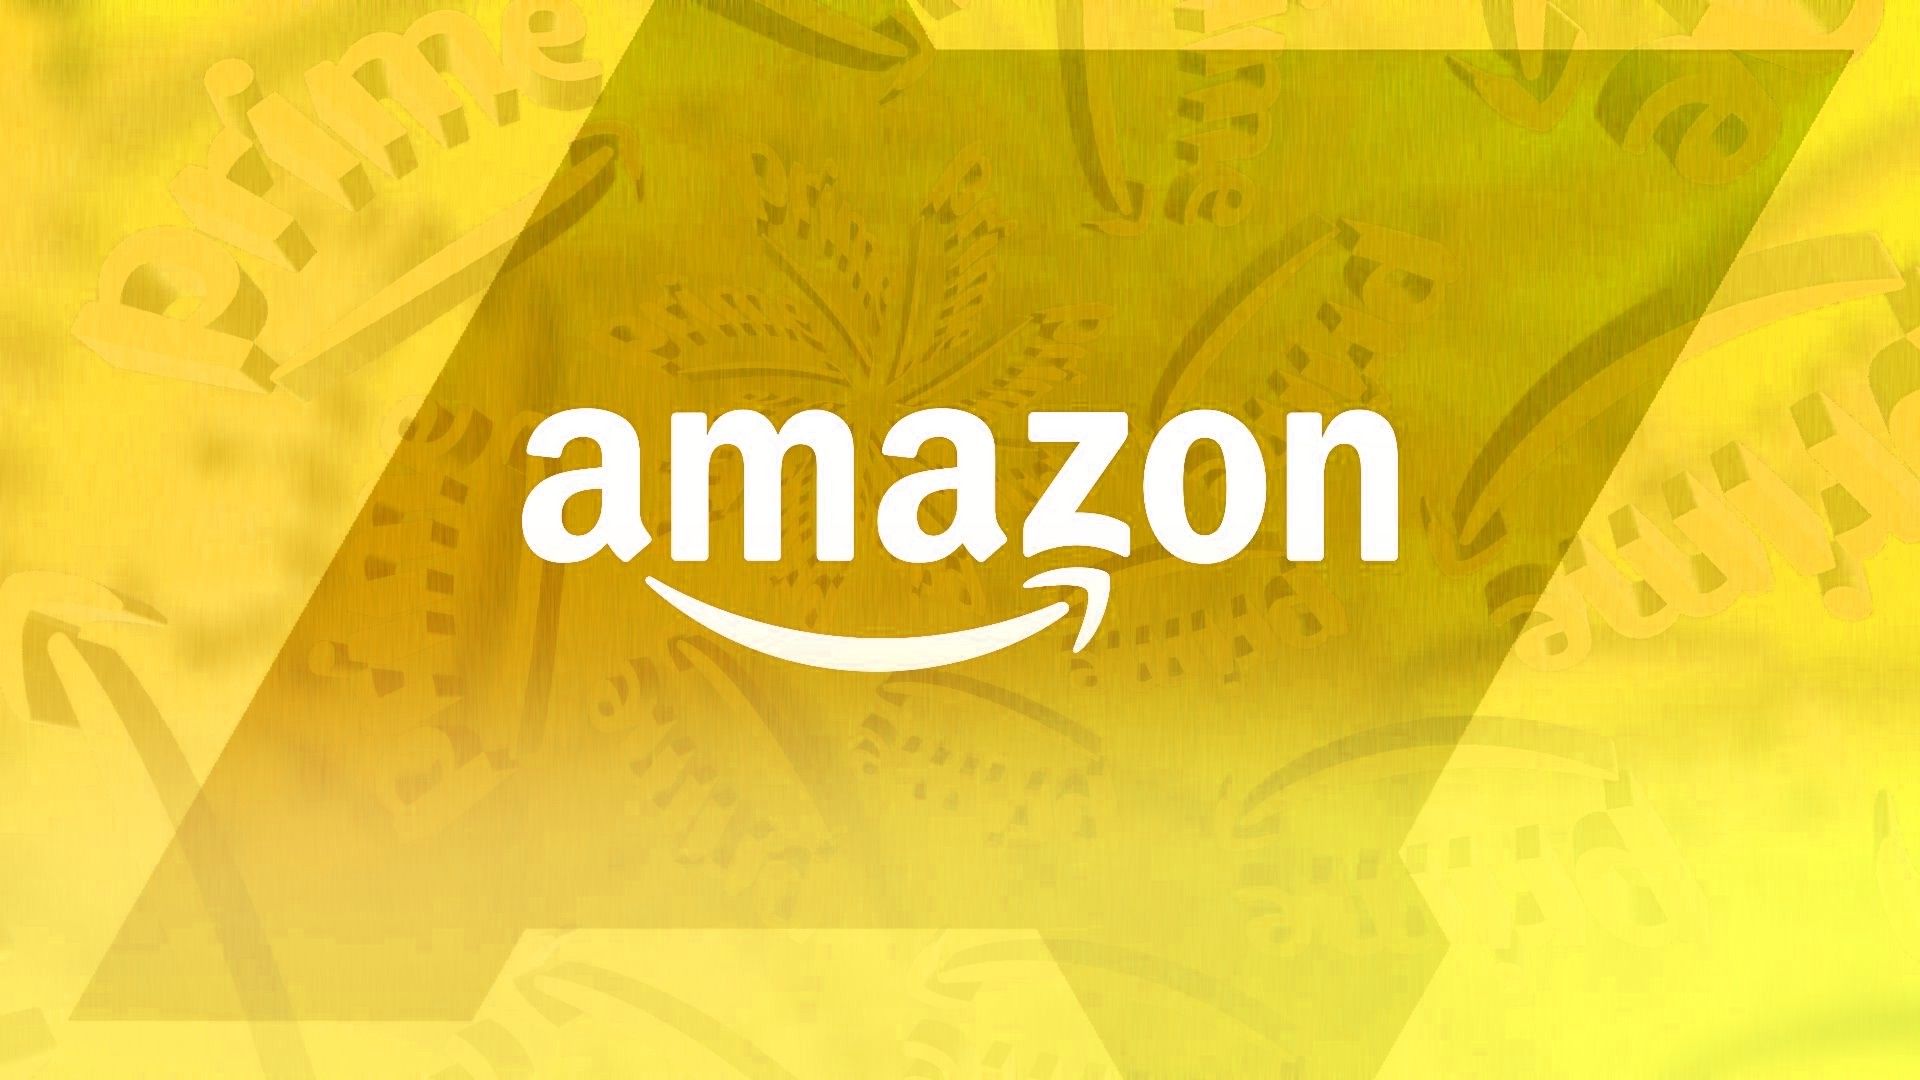 Amazon.ca $10 Gift Card, Pack of 50 (Classic Black Card Design) : Amazon.ca:  Gift Cards